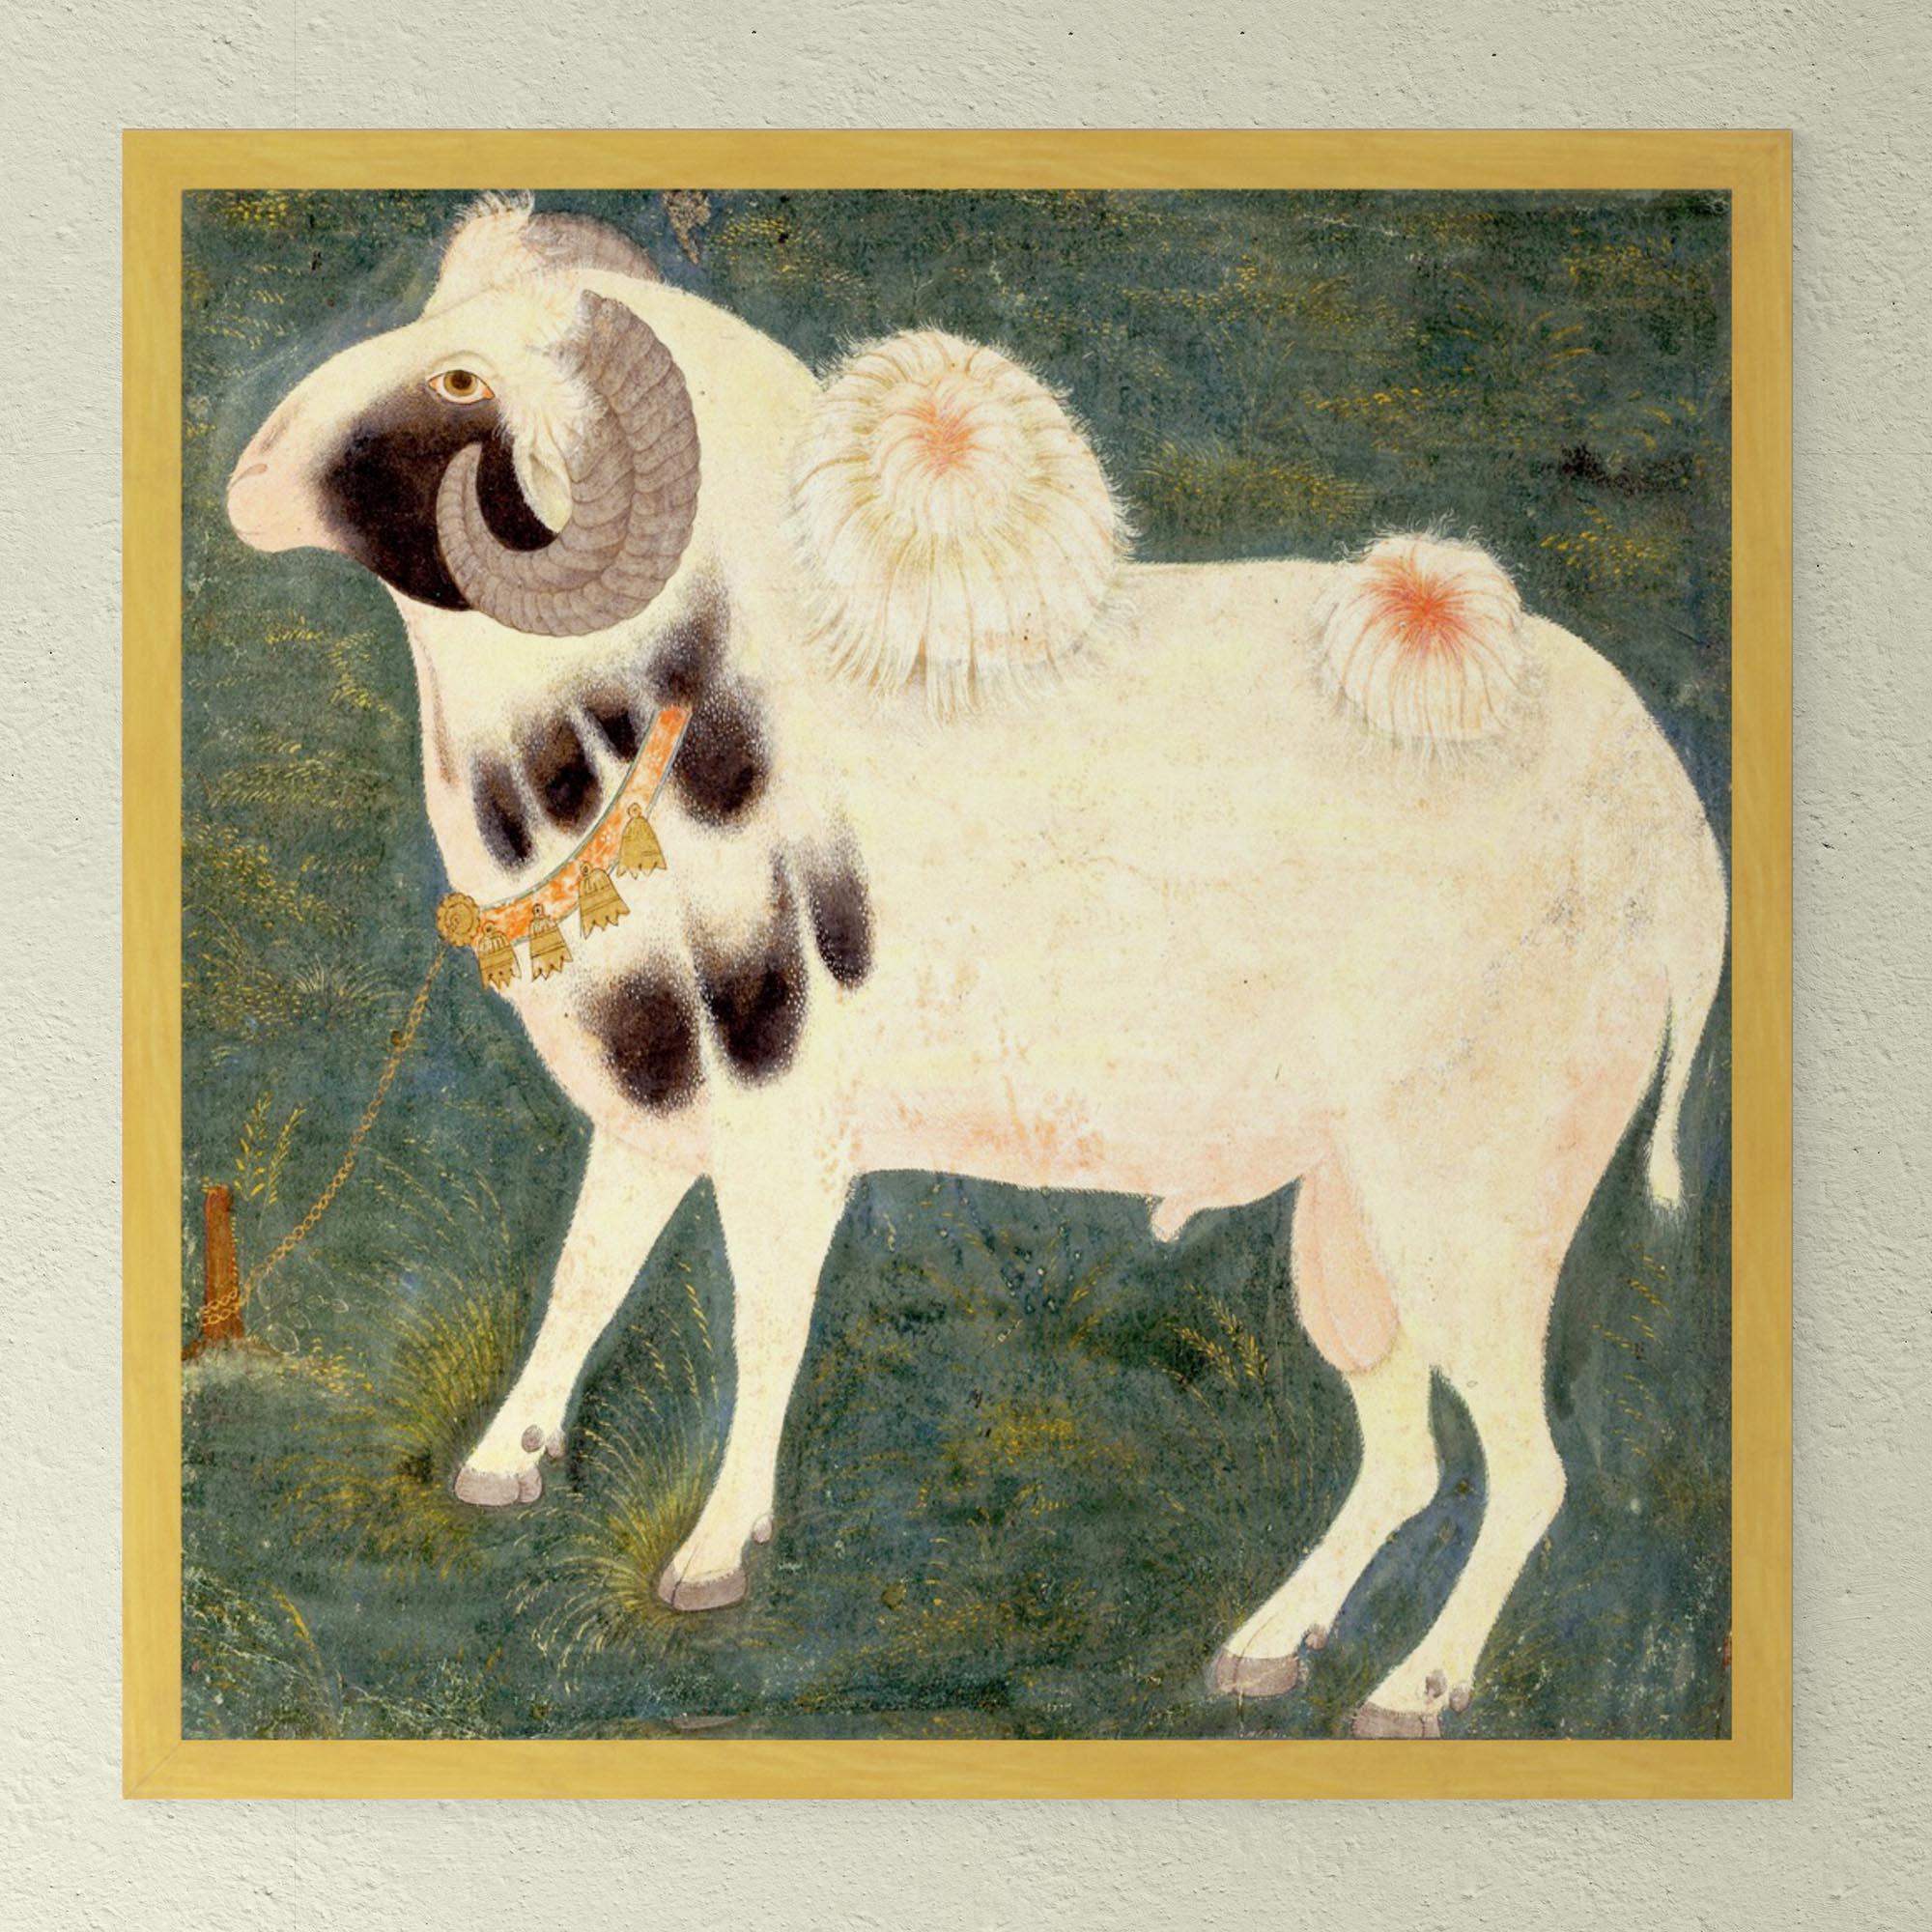 Fine art 12"x12" / Gold Frame Gold Framed Royal Ram with Gold Chain | Antique Watercolor Classical Indian Mughal Pastoral Goat Sheep Horse Framed Art Print